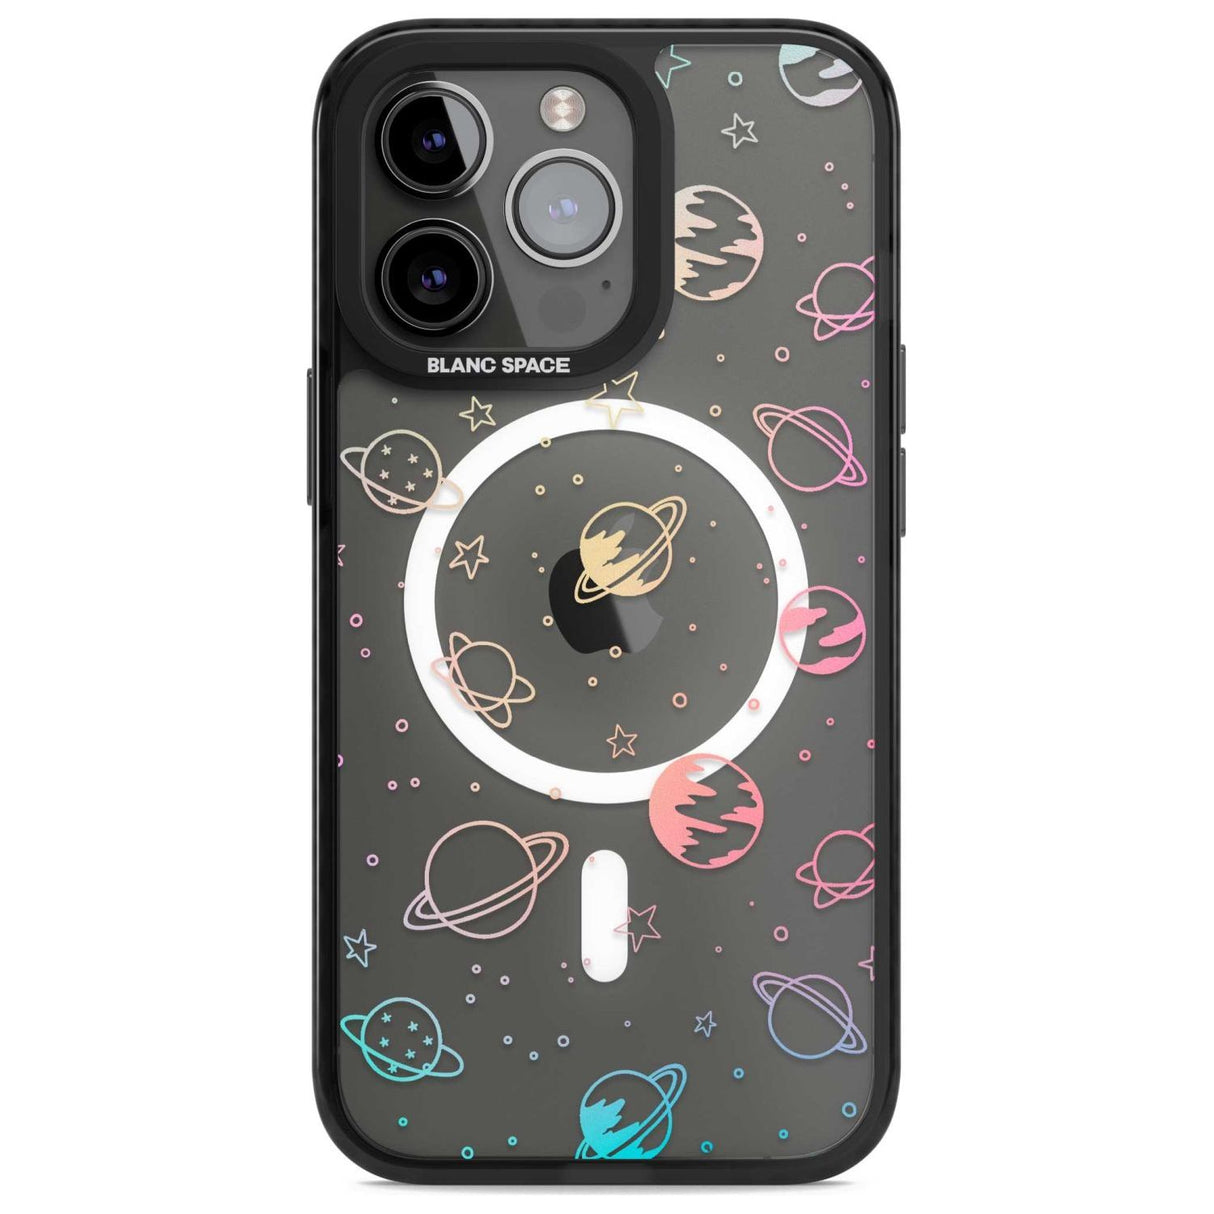 Cosmic Outer Space Design Pastels on Clear Phone Case iPhone 15 Pro Max / Magsafe Black Impact Case,iPhone 15 Pro / Magsafe Black Impact Case,iPhone 14 Pro Max / Magsafe Black Impact Case,iPhone 14 Pro / Magsafe Black Impact Case,iPhone 13 Pro / Magsafe Black Impact Case Blanc Space